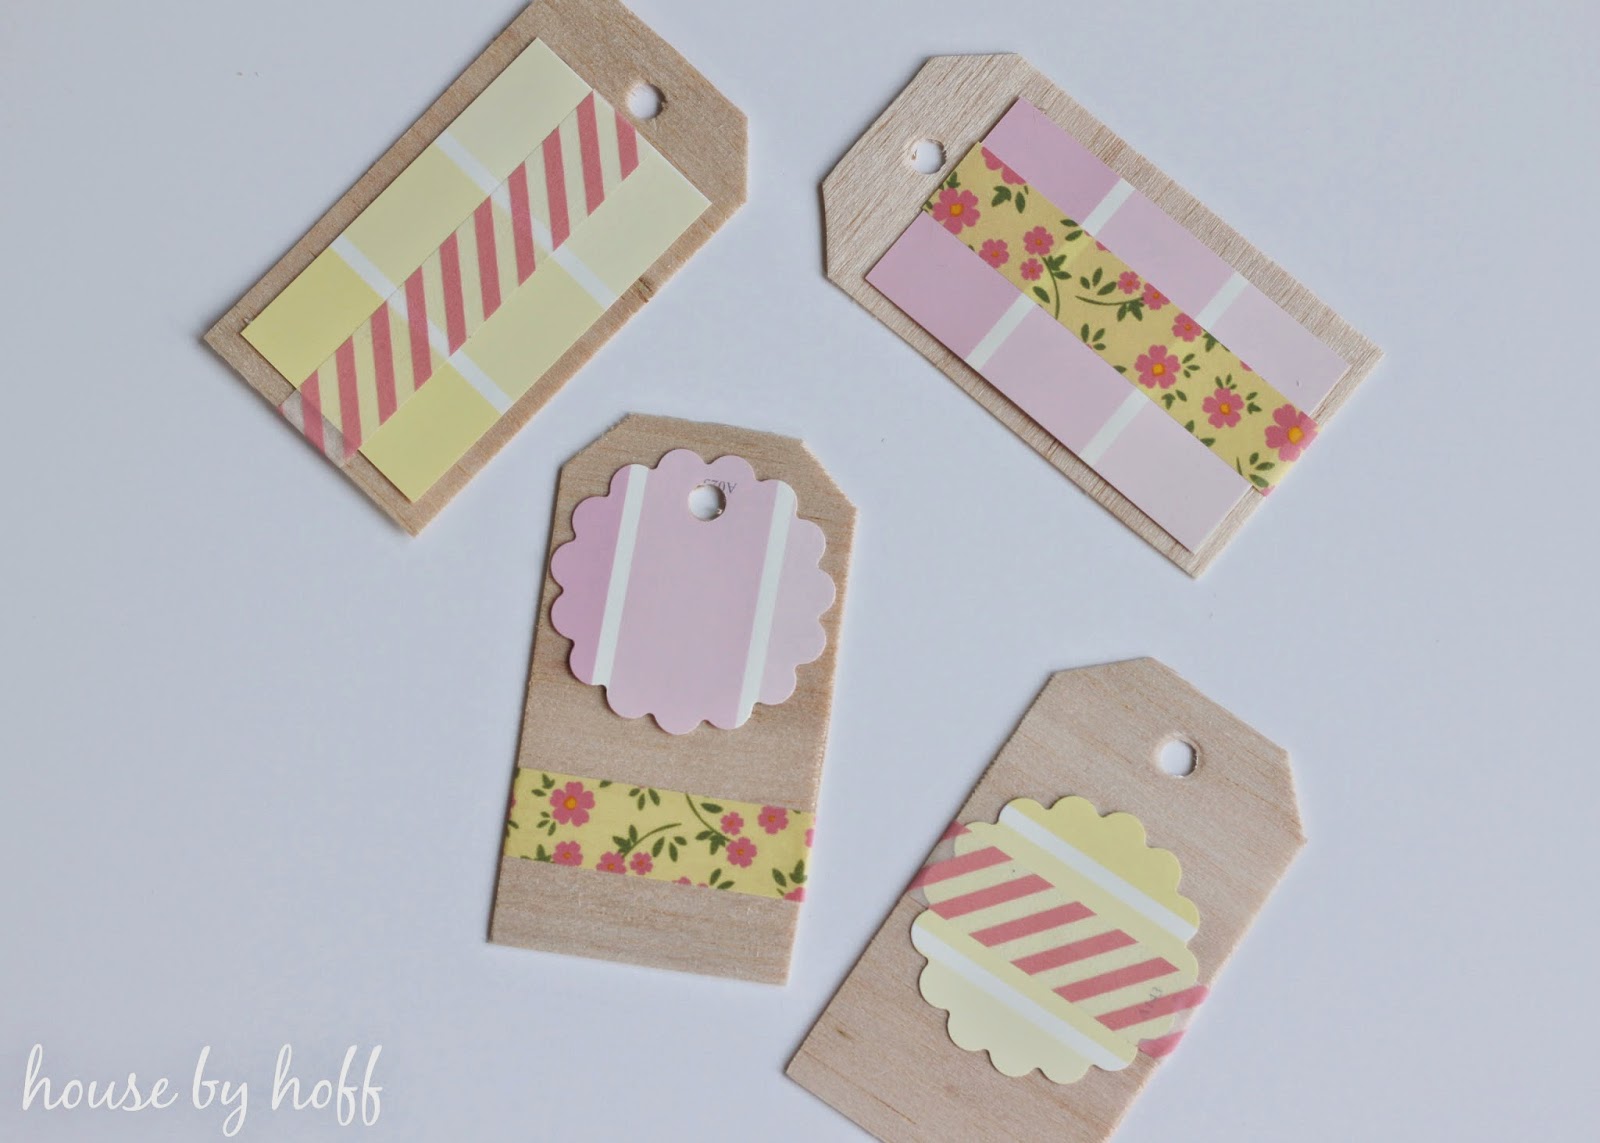 The gift tags put together with floral and pink and yellow.